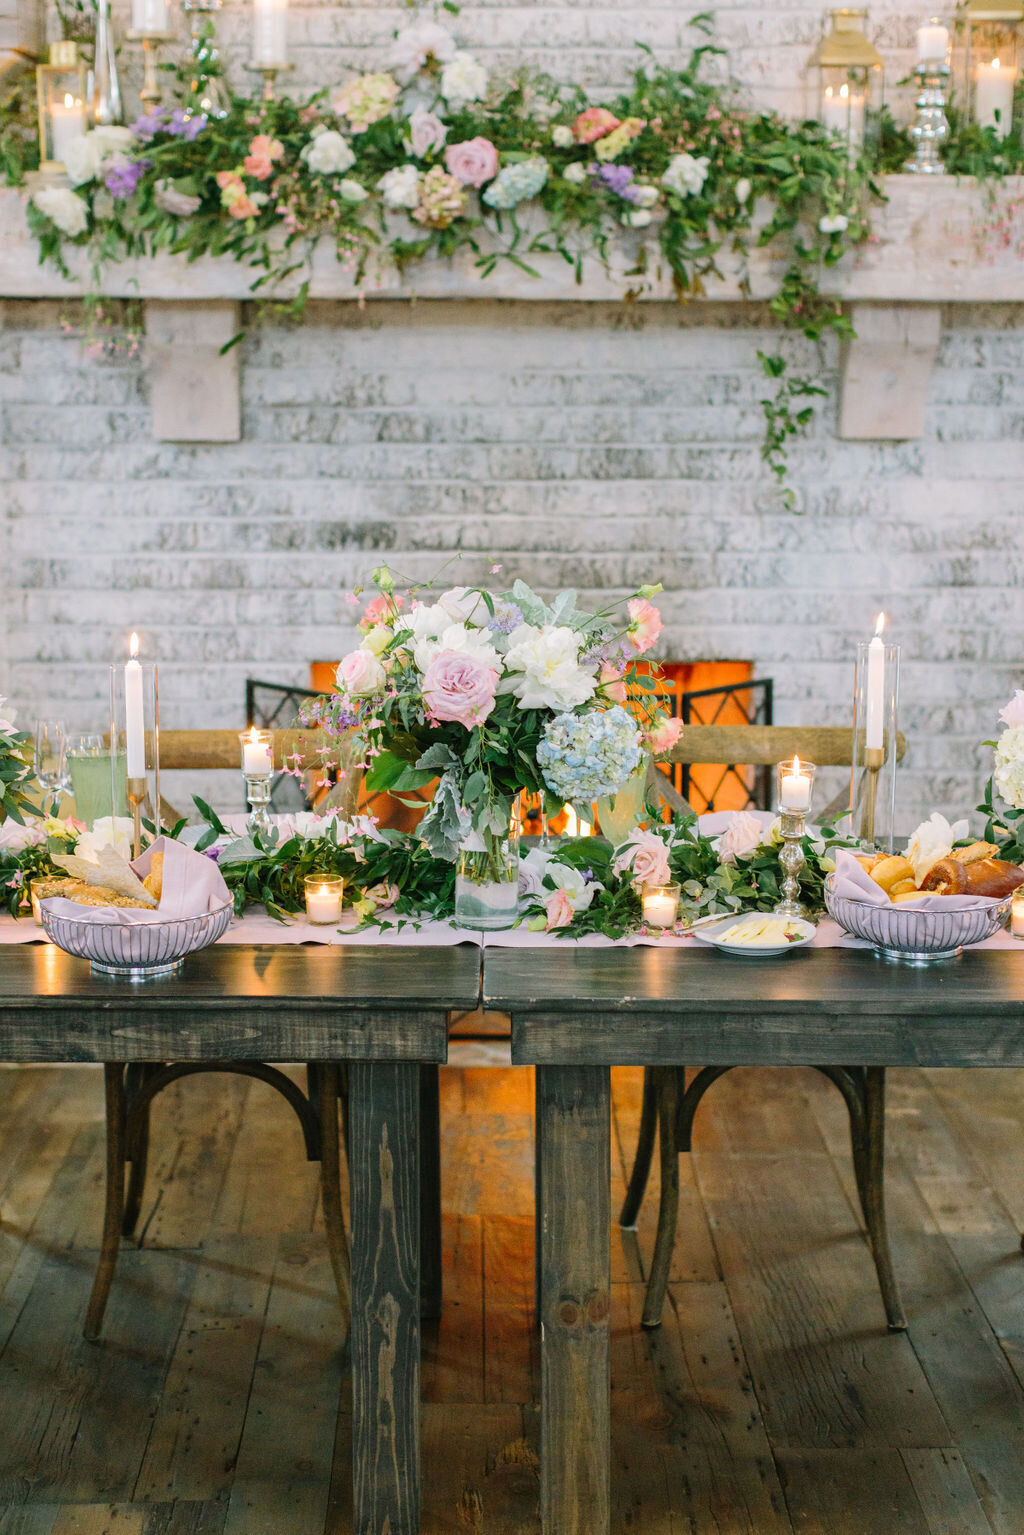 Wedding reception table with flowers and candles